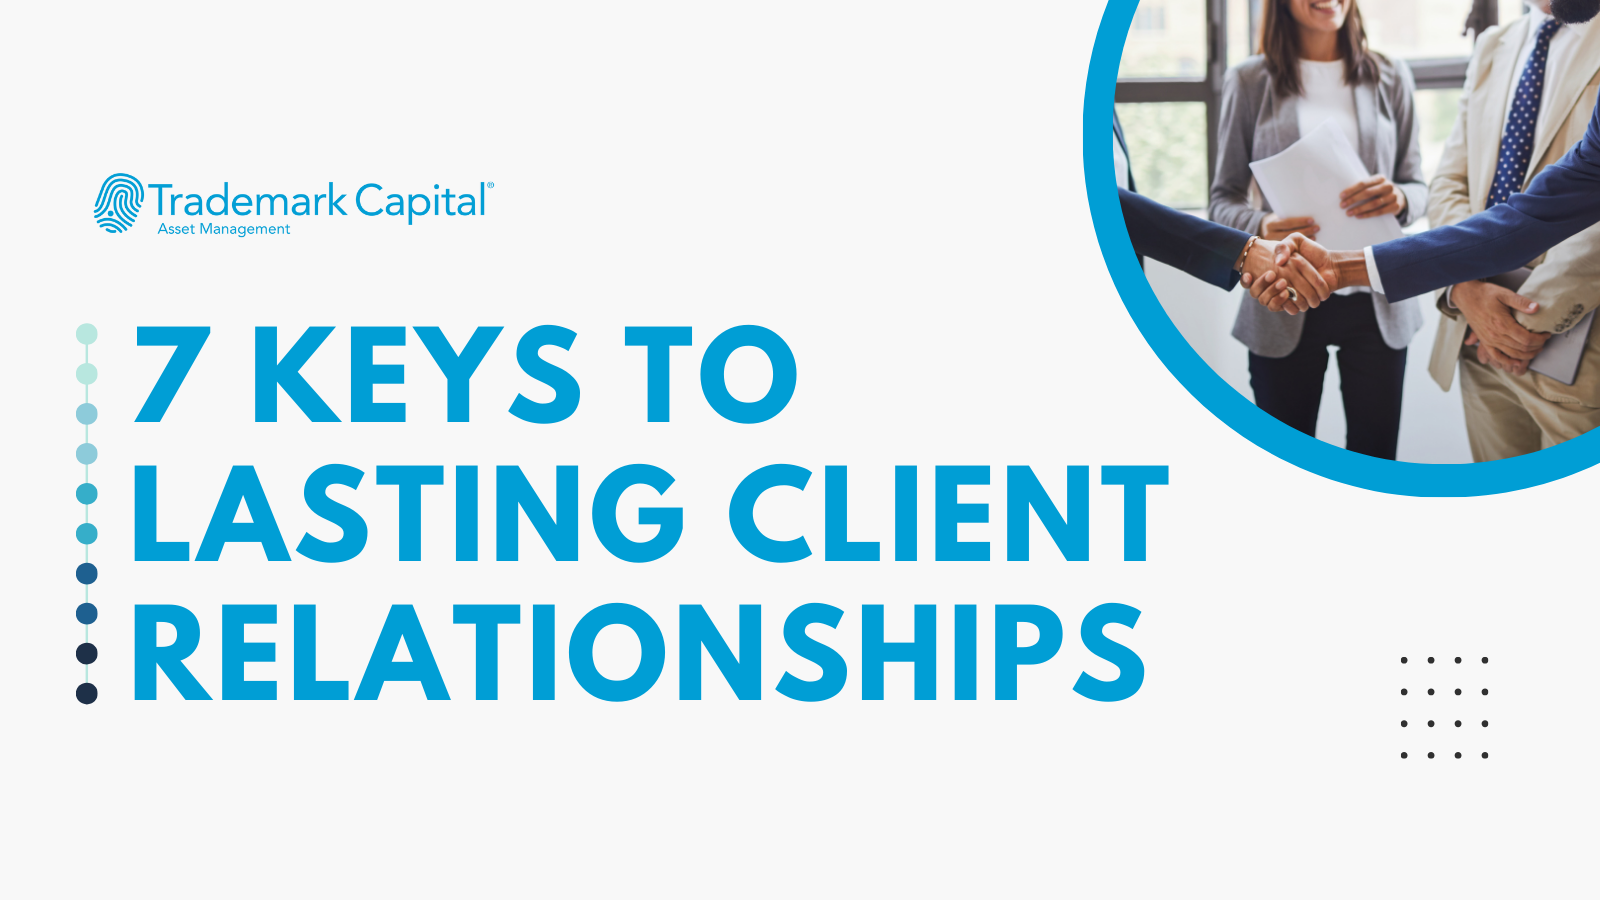 Building Trust and Value: The Keys to Lasting Client Relationships